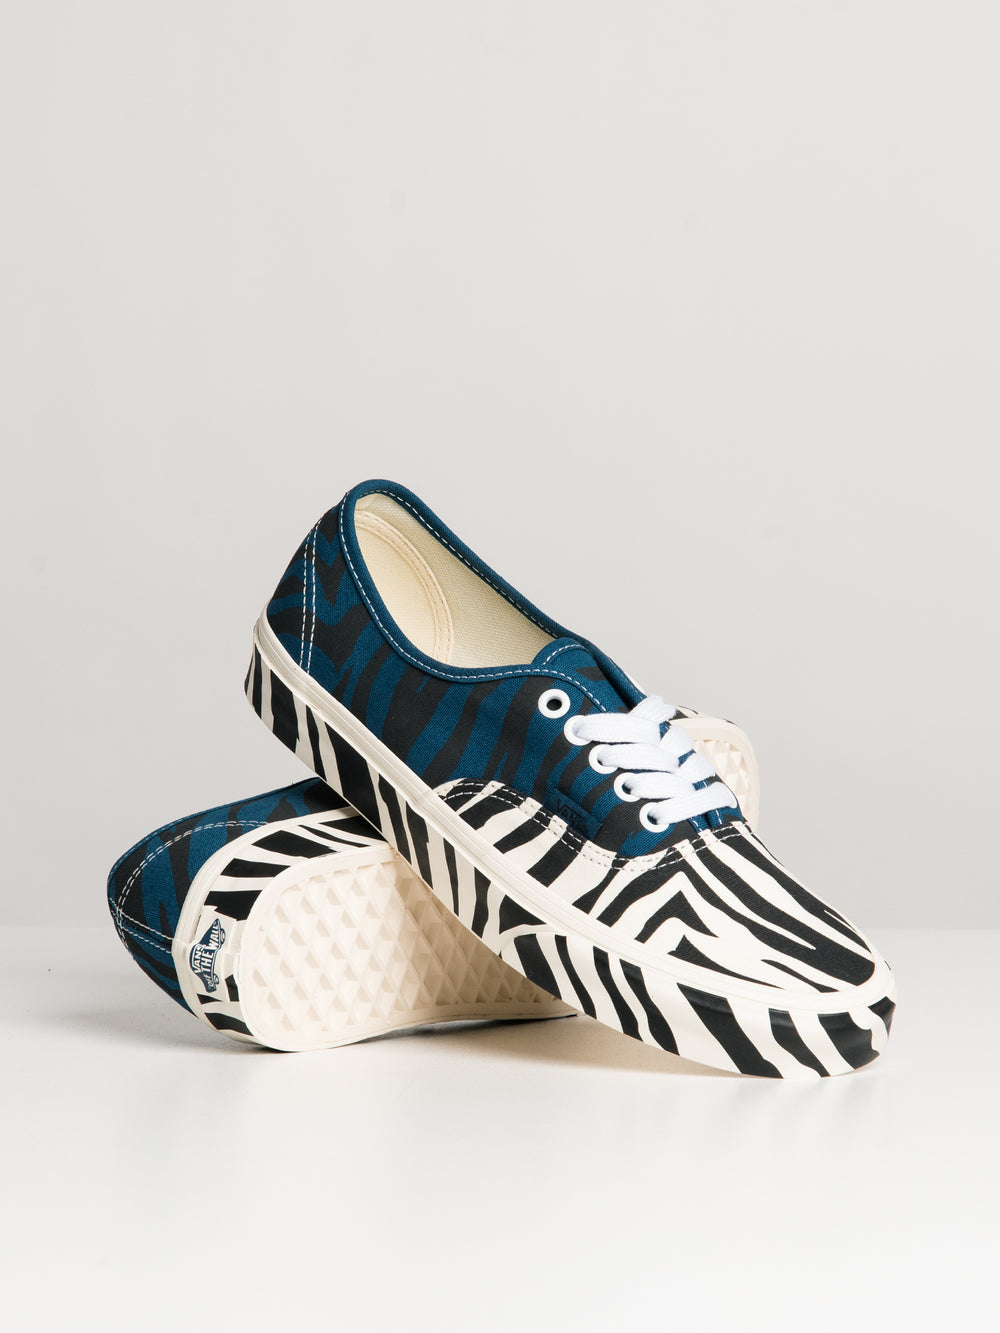 WOMENS VANS AUTHENTIC ANIMAL BLUE SNEAKER - CLEARANCE